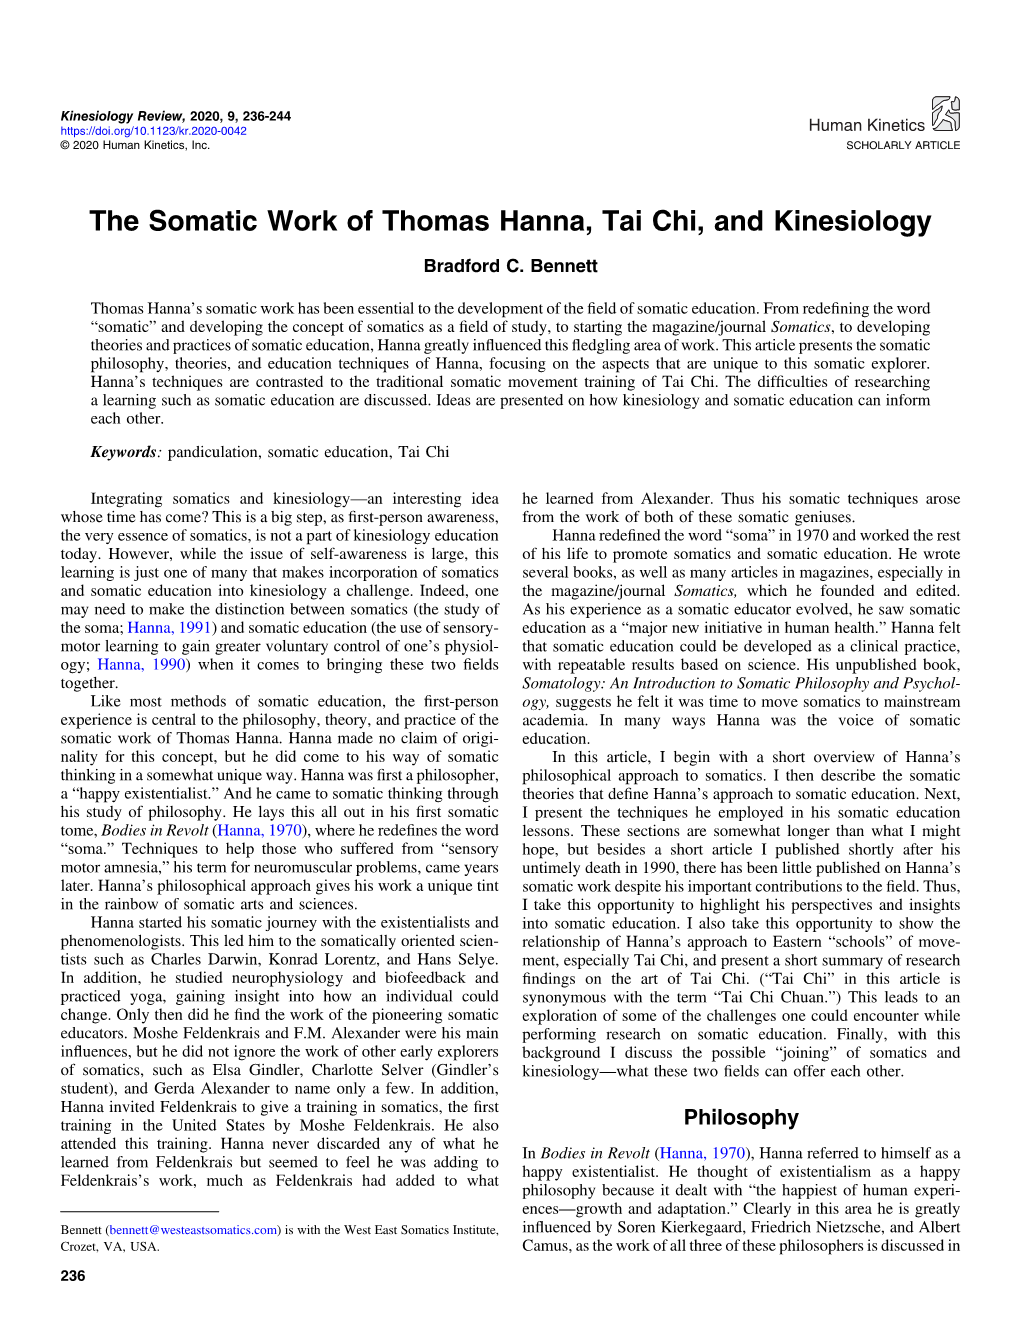 The Somatic Work of Thomas Hanna, Tai Chi, and Kinesiology